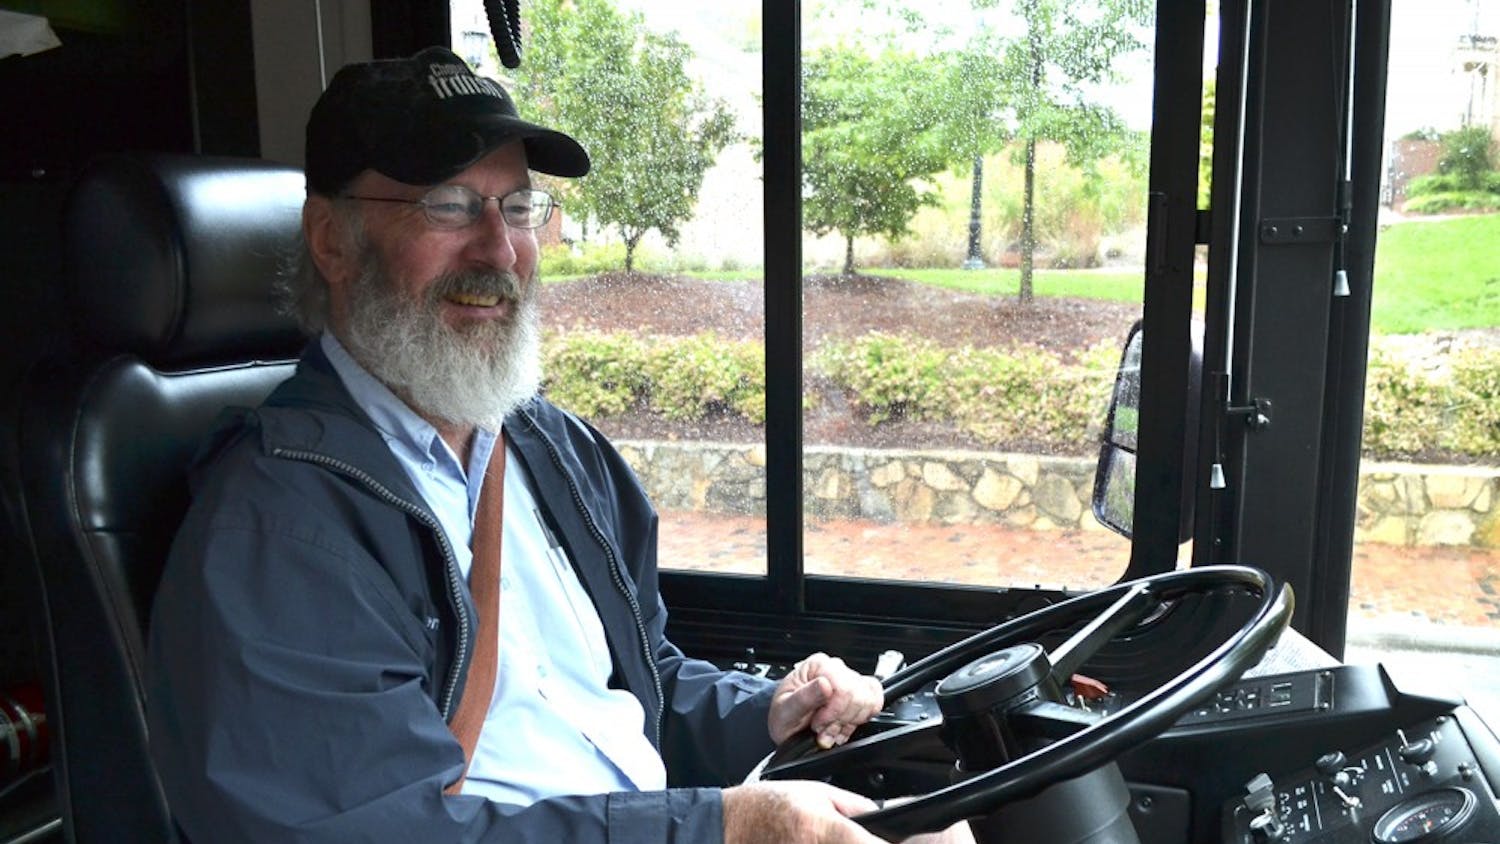 J Bus driver David Deming discusses the quotes he posts in his bus during his morning route.